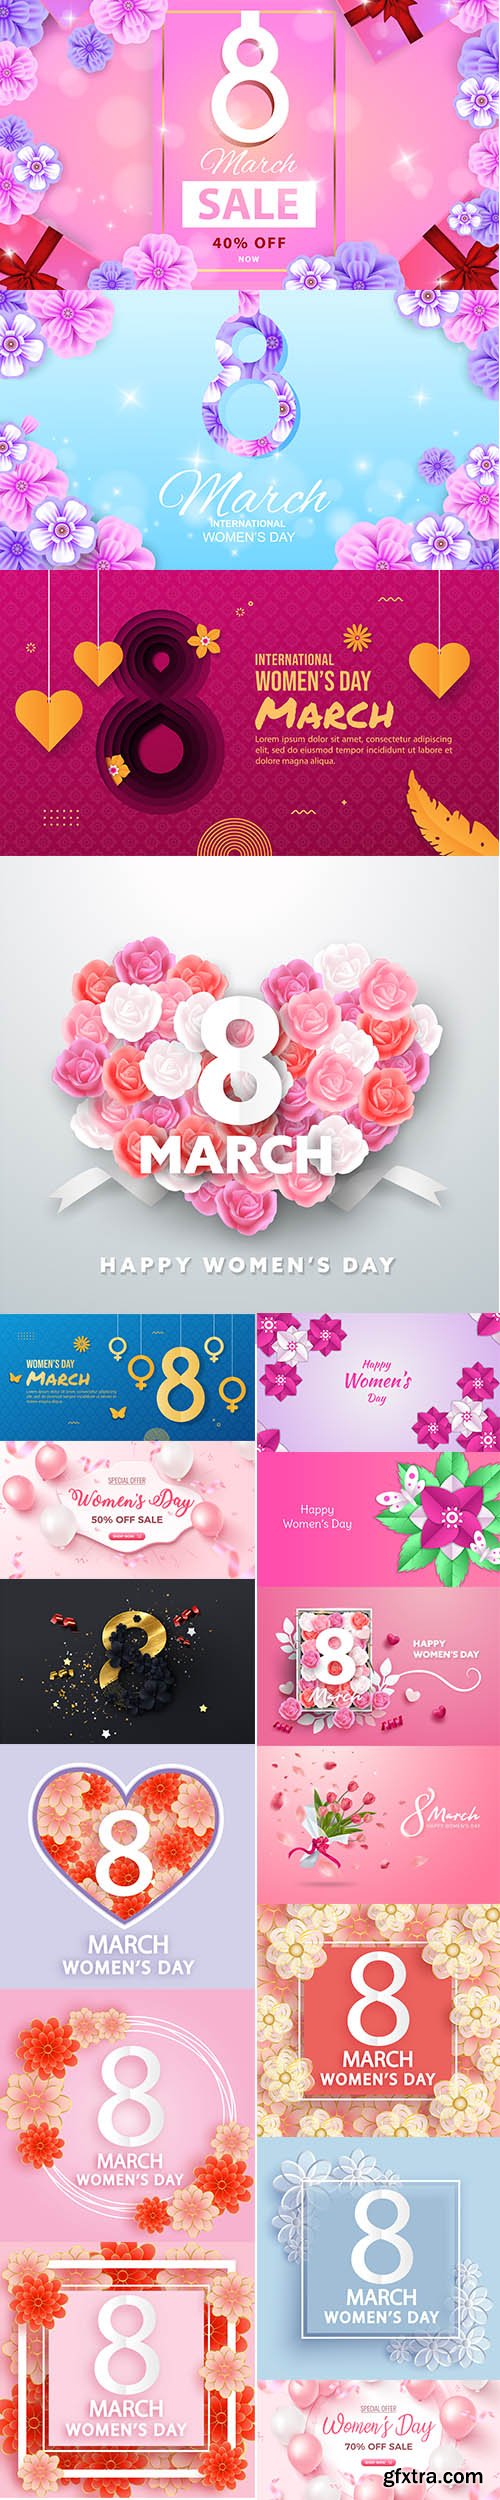 Vector Set of Womens Day Illustrations Vol 4